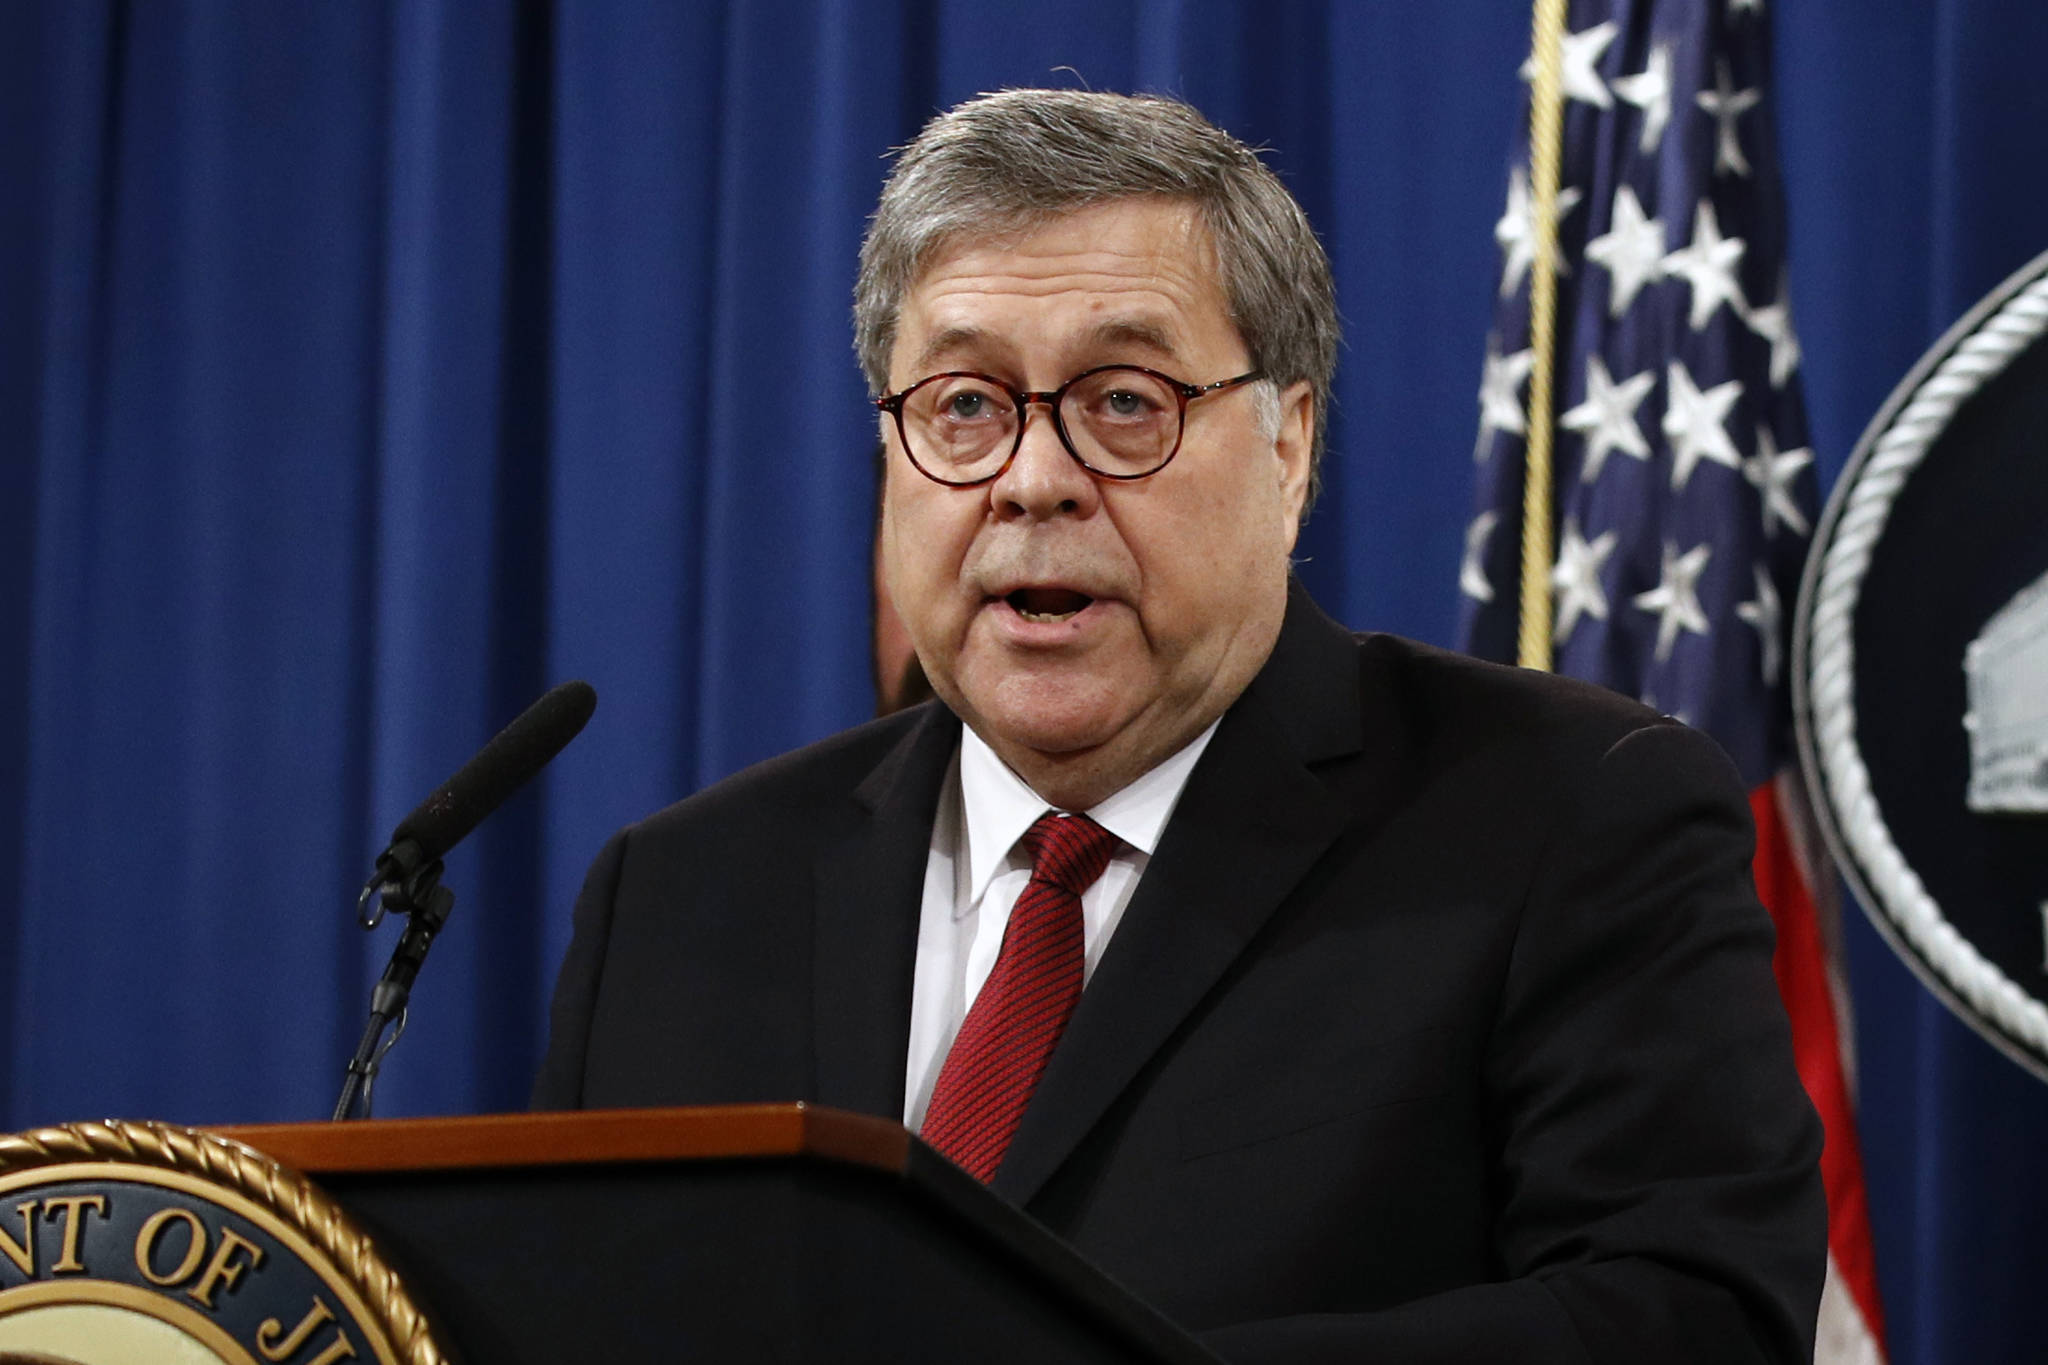 In this April 18, 2019, file photo, Attorney General William Barr speaks about the release of a redacted version of special counsel Robert Mueller’s report during a news conference at the Department of Justice in Washington. (AP Photo | Patrick Semansky, File)